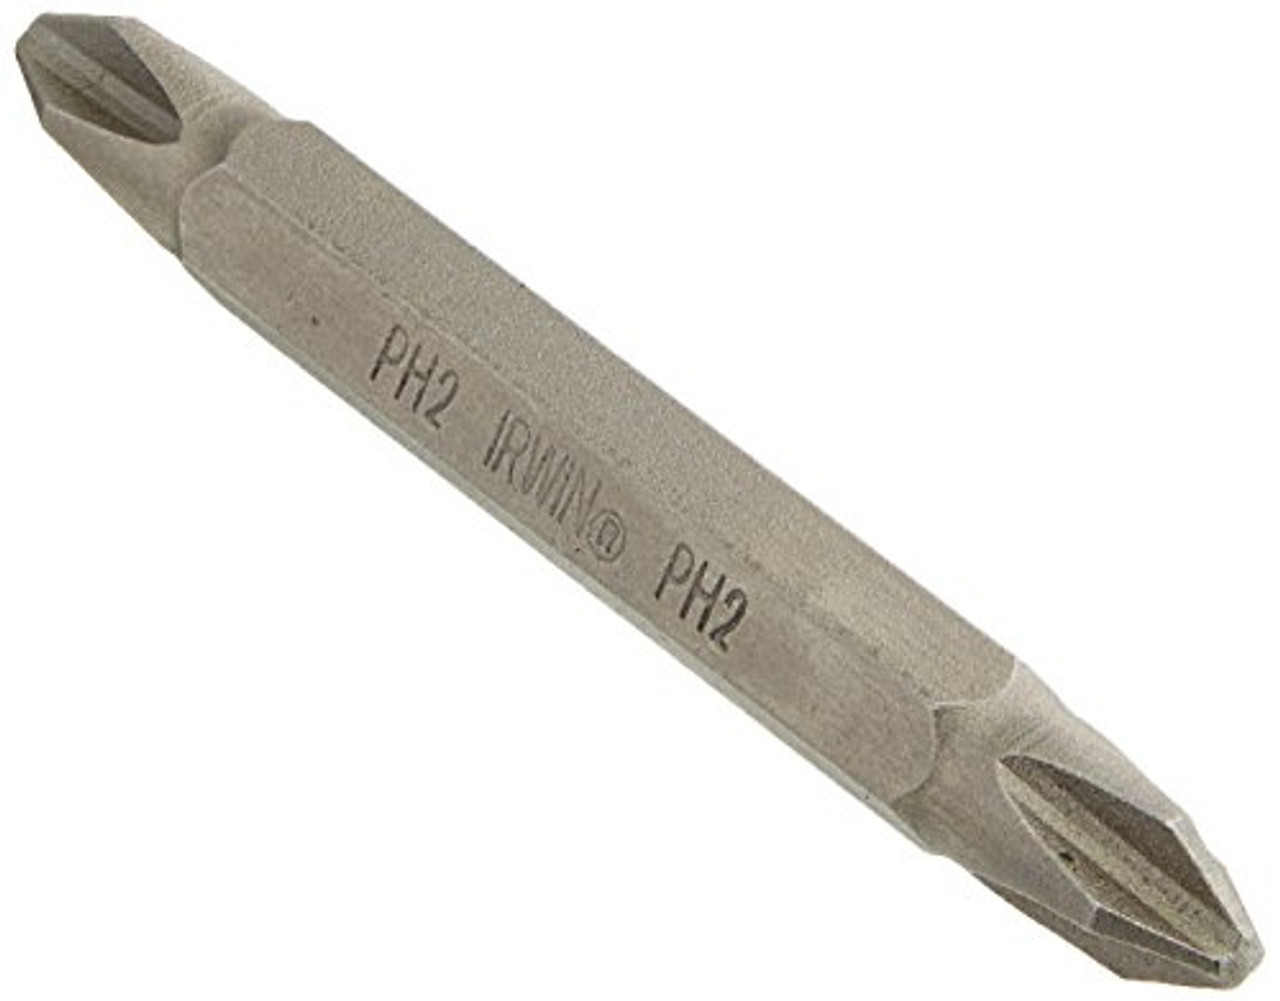 Irwin Tools 3532025B Double-Ended Screwdriving Bit, 2 Phillips (5 Pack)